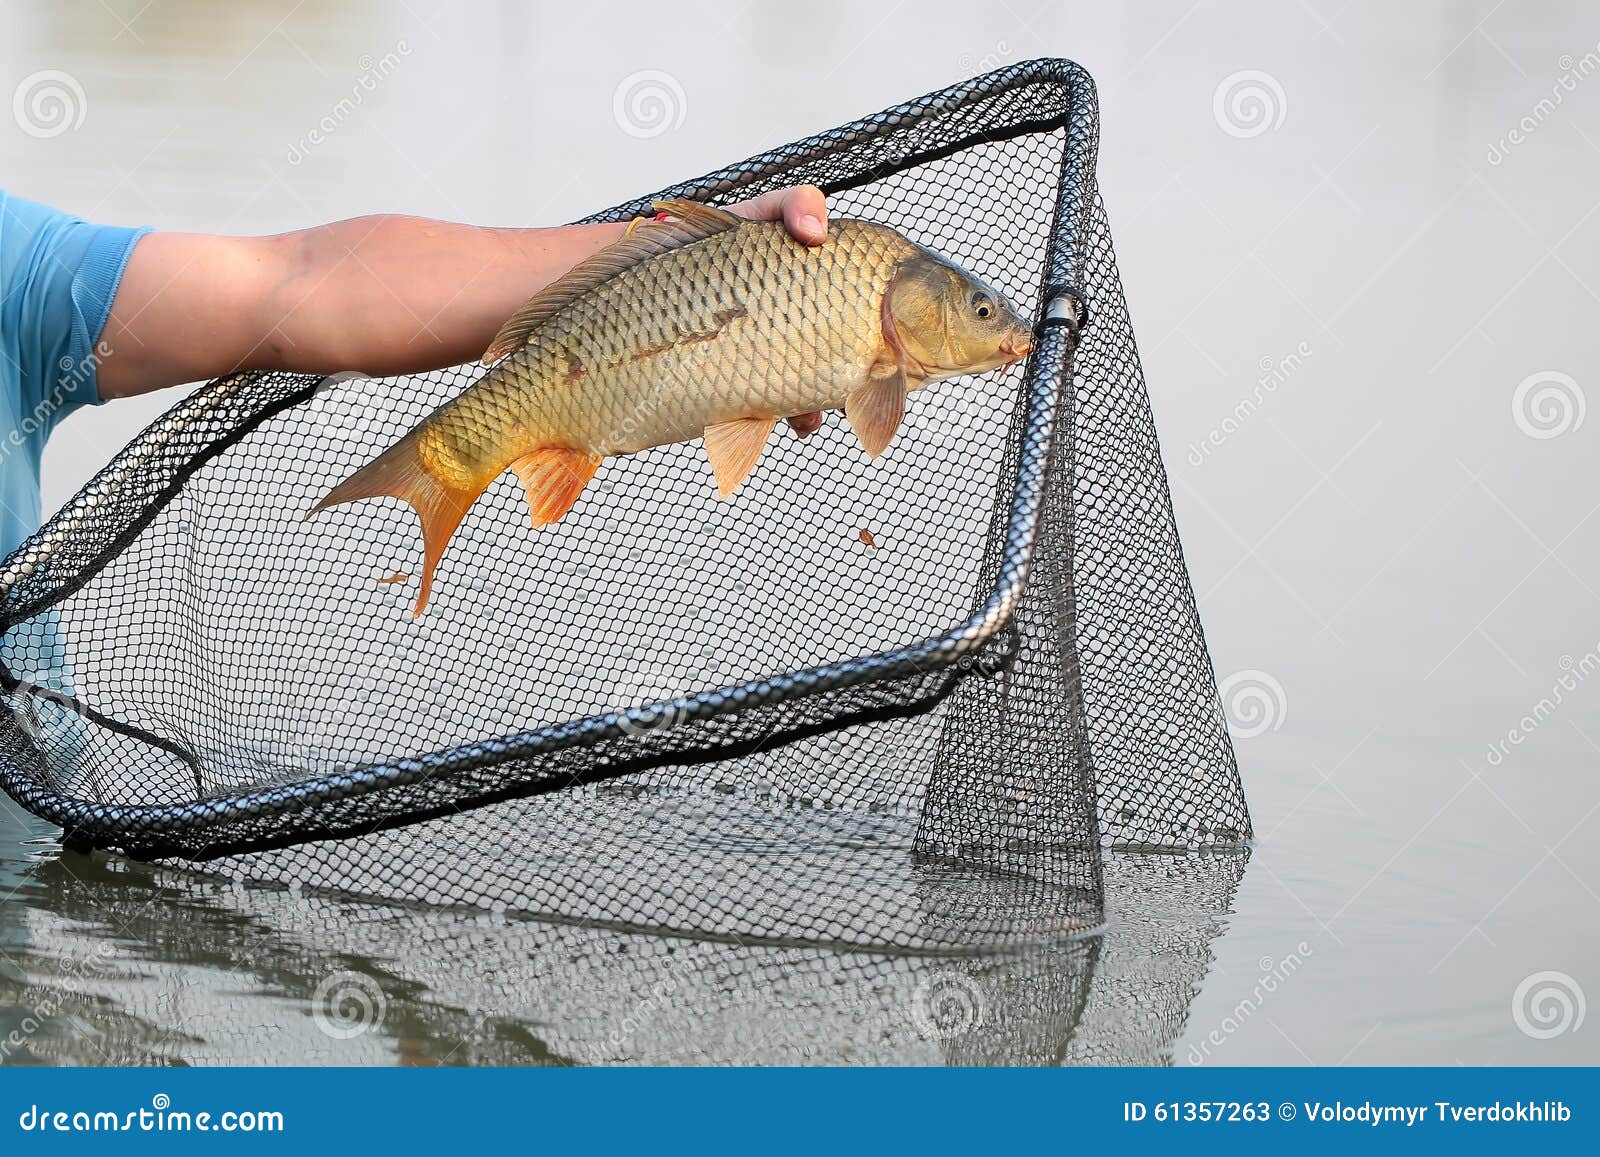 Fish catch and dip net stock image. Image of ripple, line - 61357263